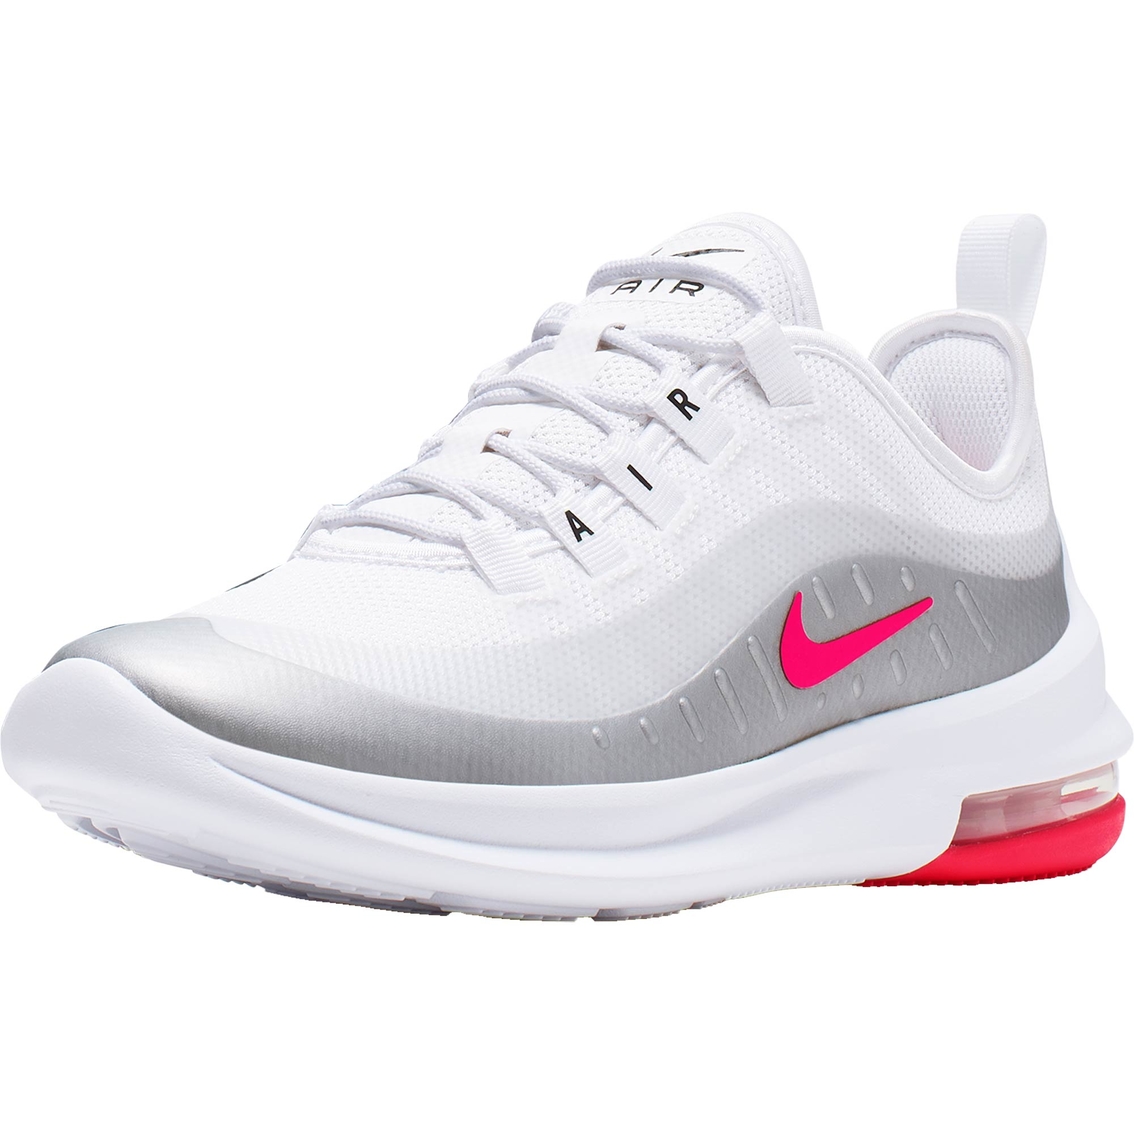 Nike Air Max Axis Girls Hot Sale, UP TO 